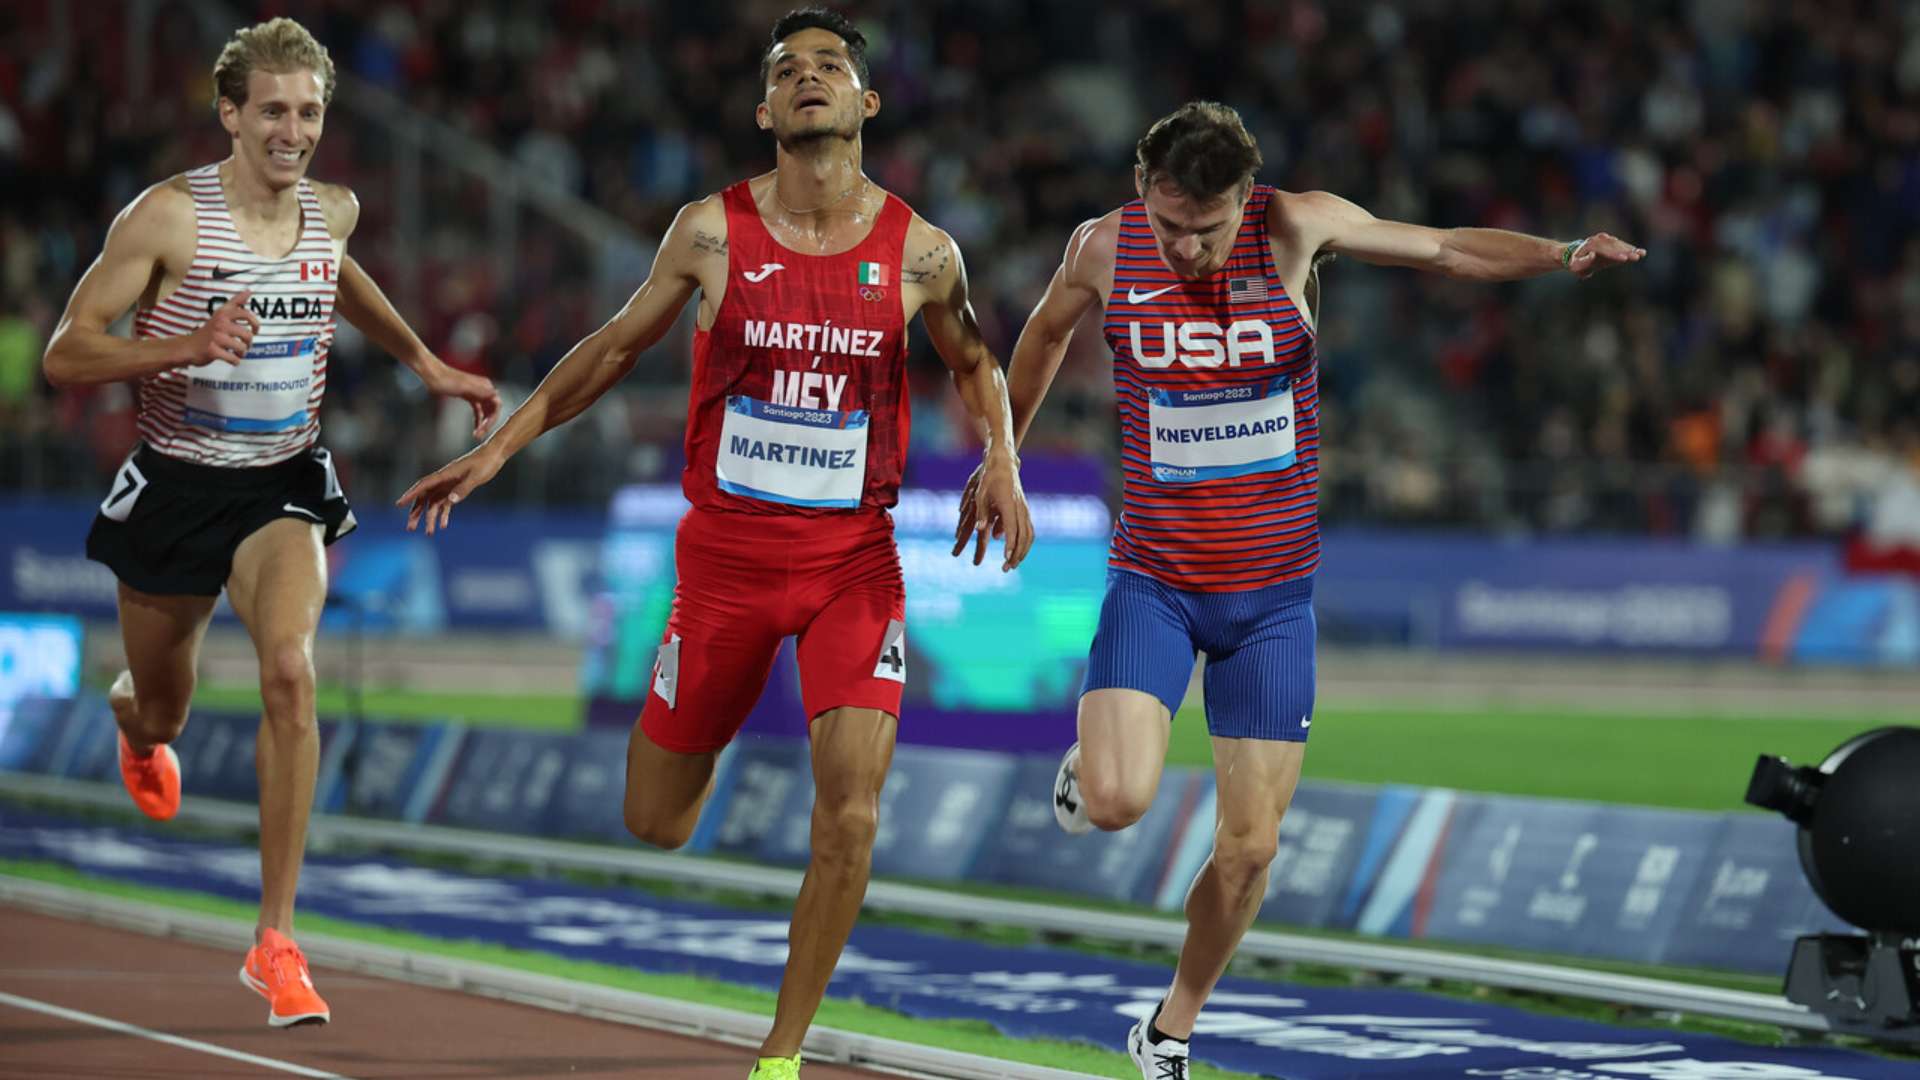 American Kasey Knevelbaard conquers gold in the 5,000 meters